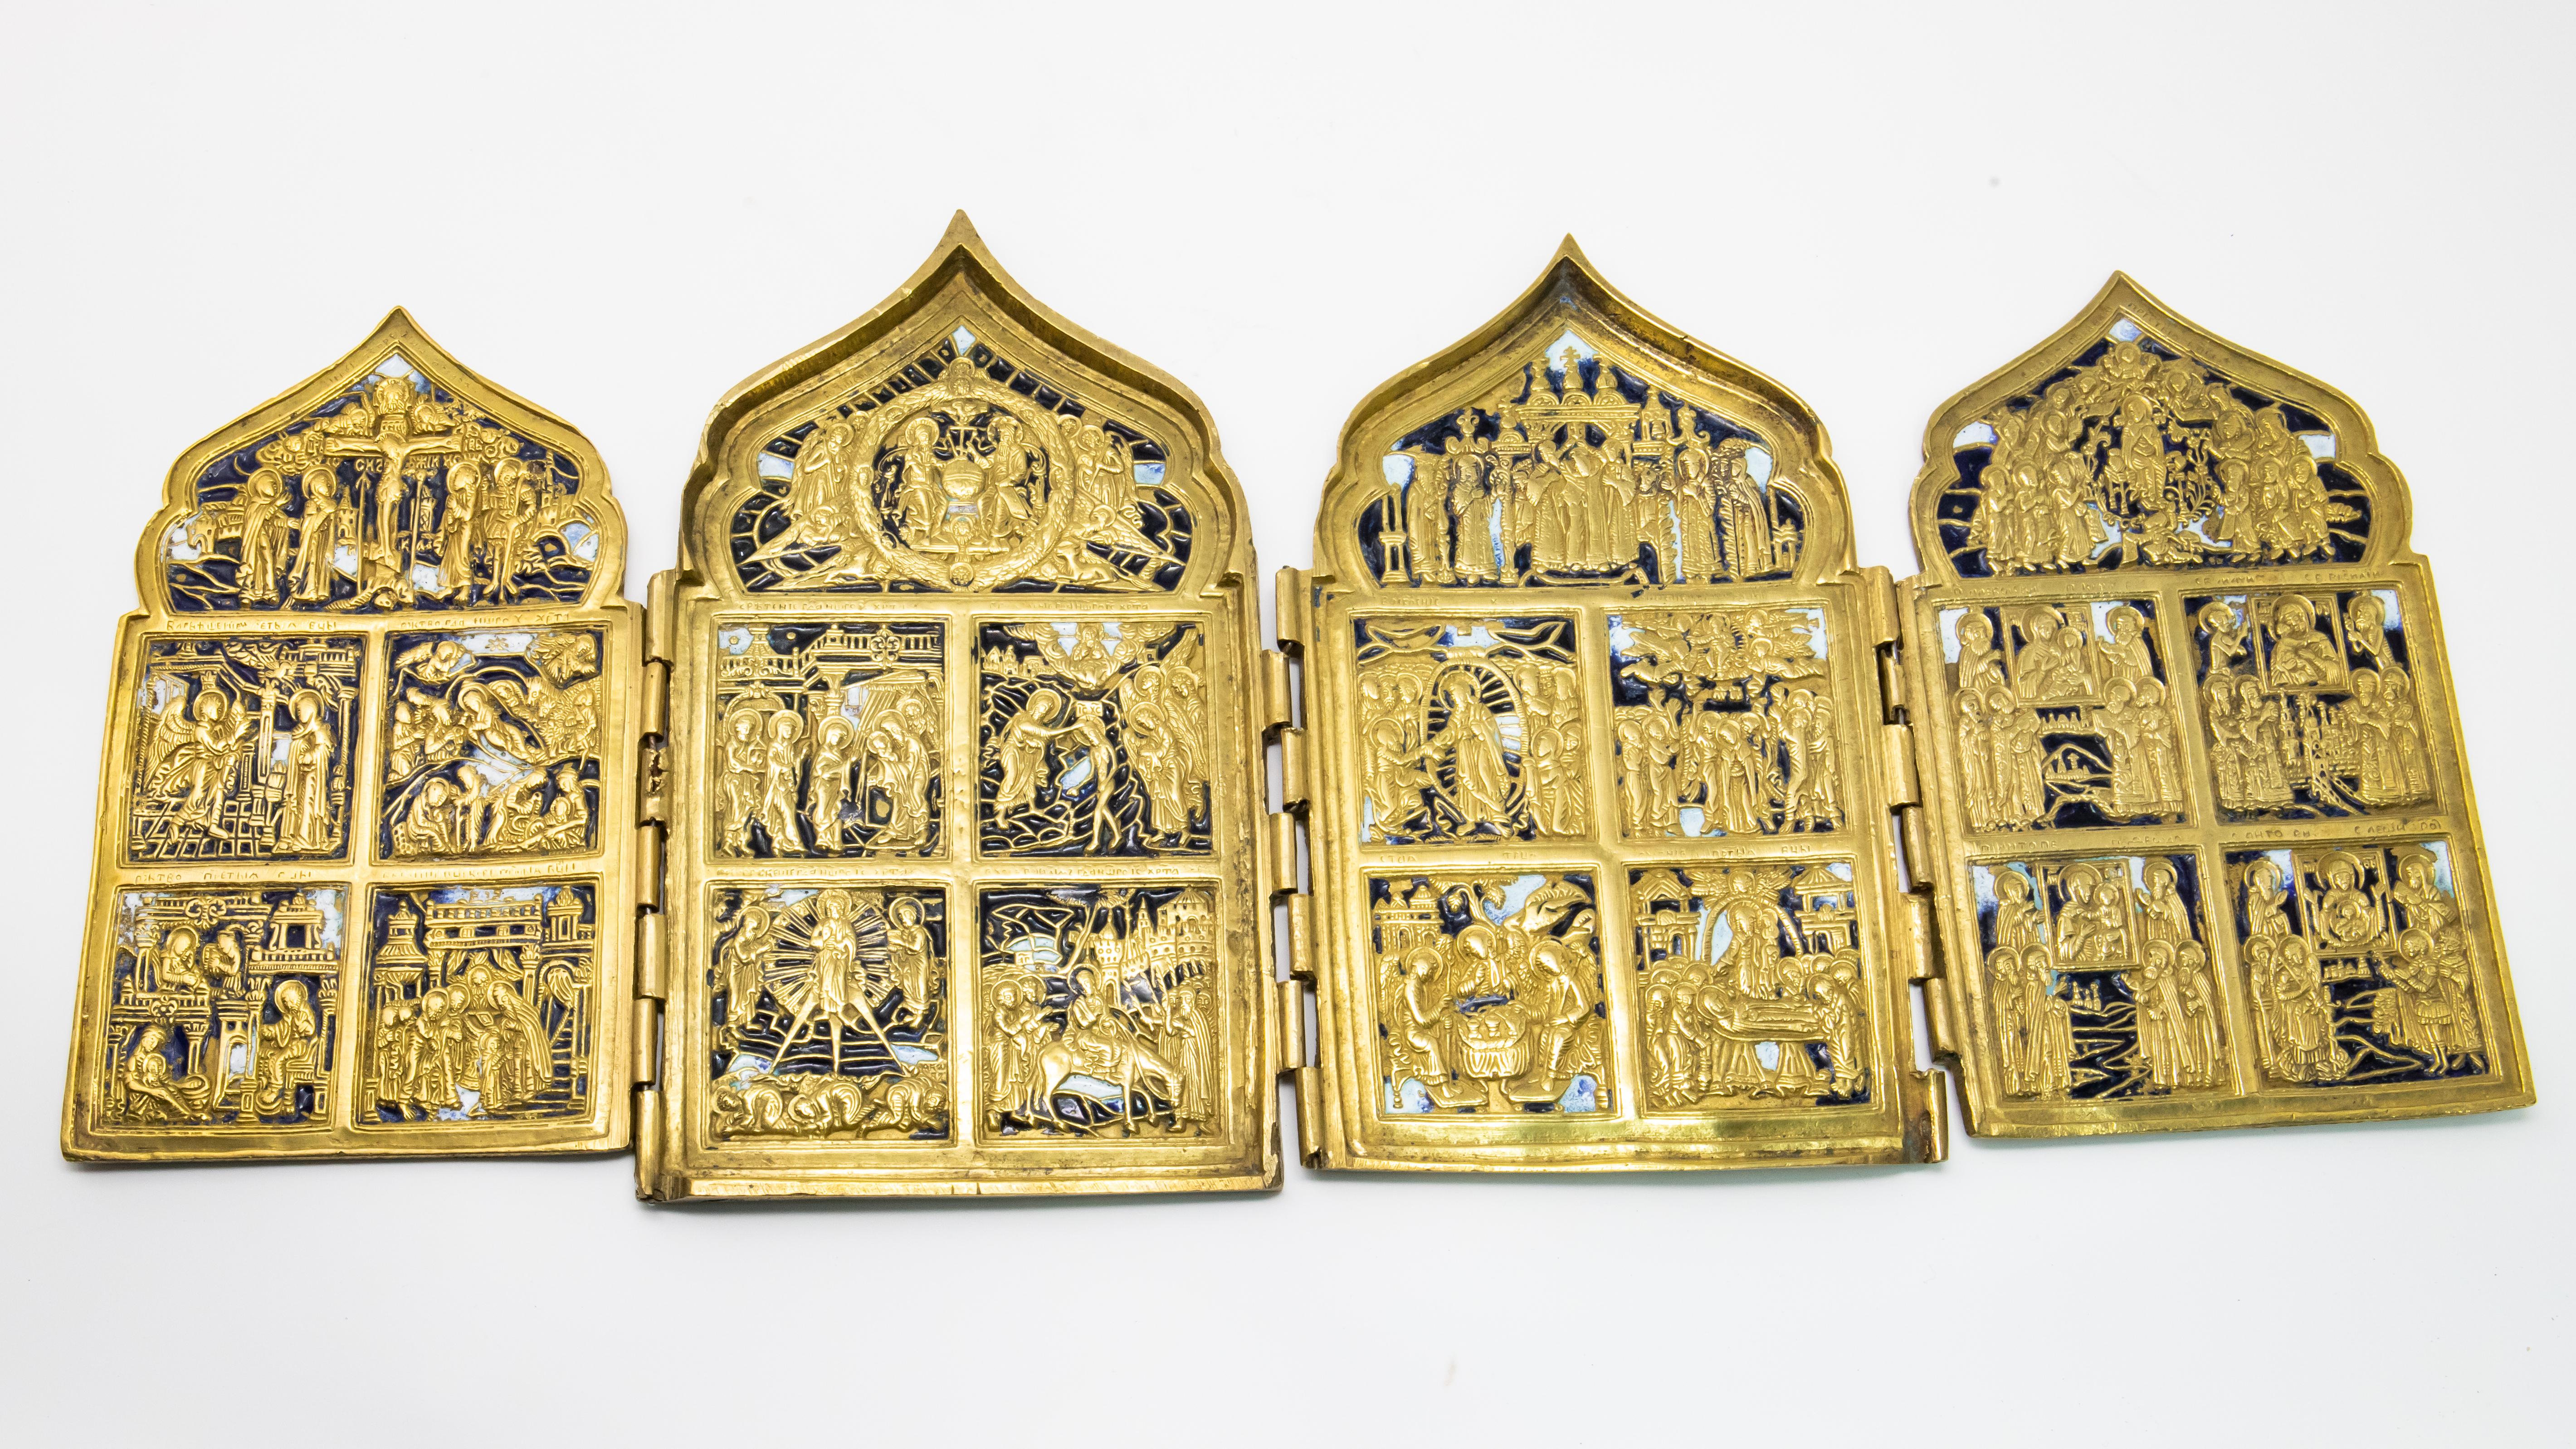 Russian orthodox Quadriptych, 19th century. Traveling story teller. Made of solid brass with enamel paint.